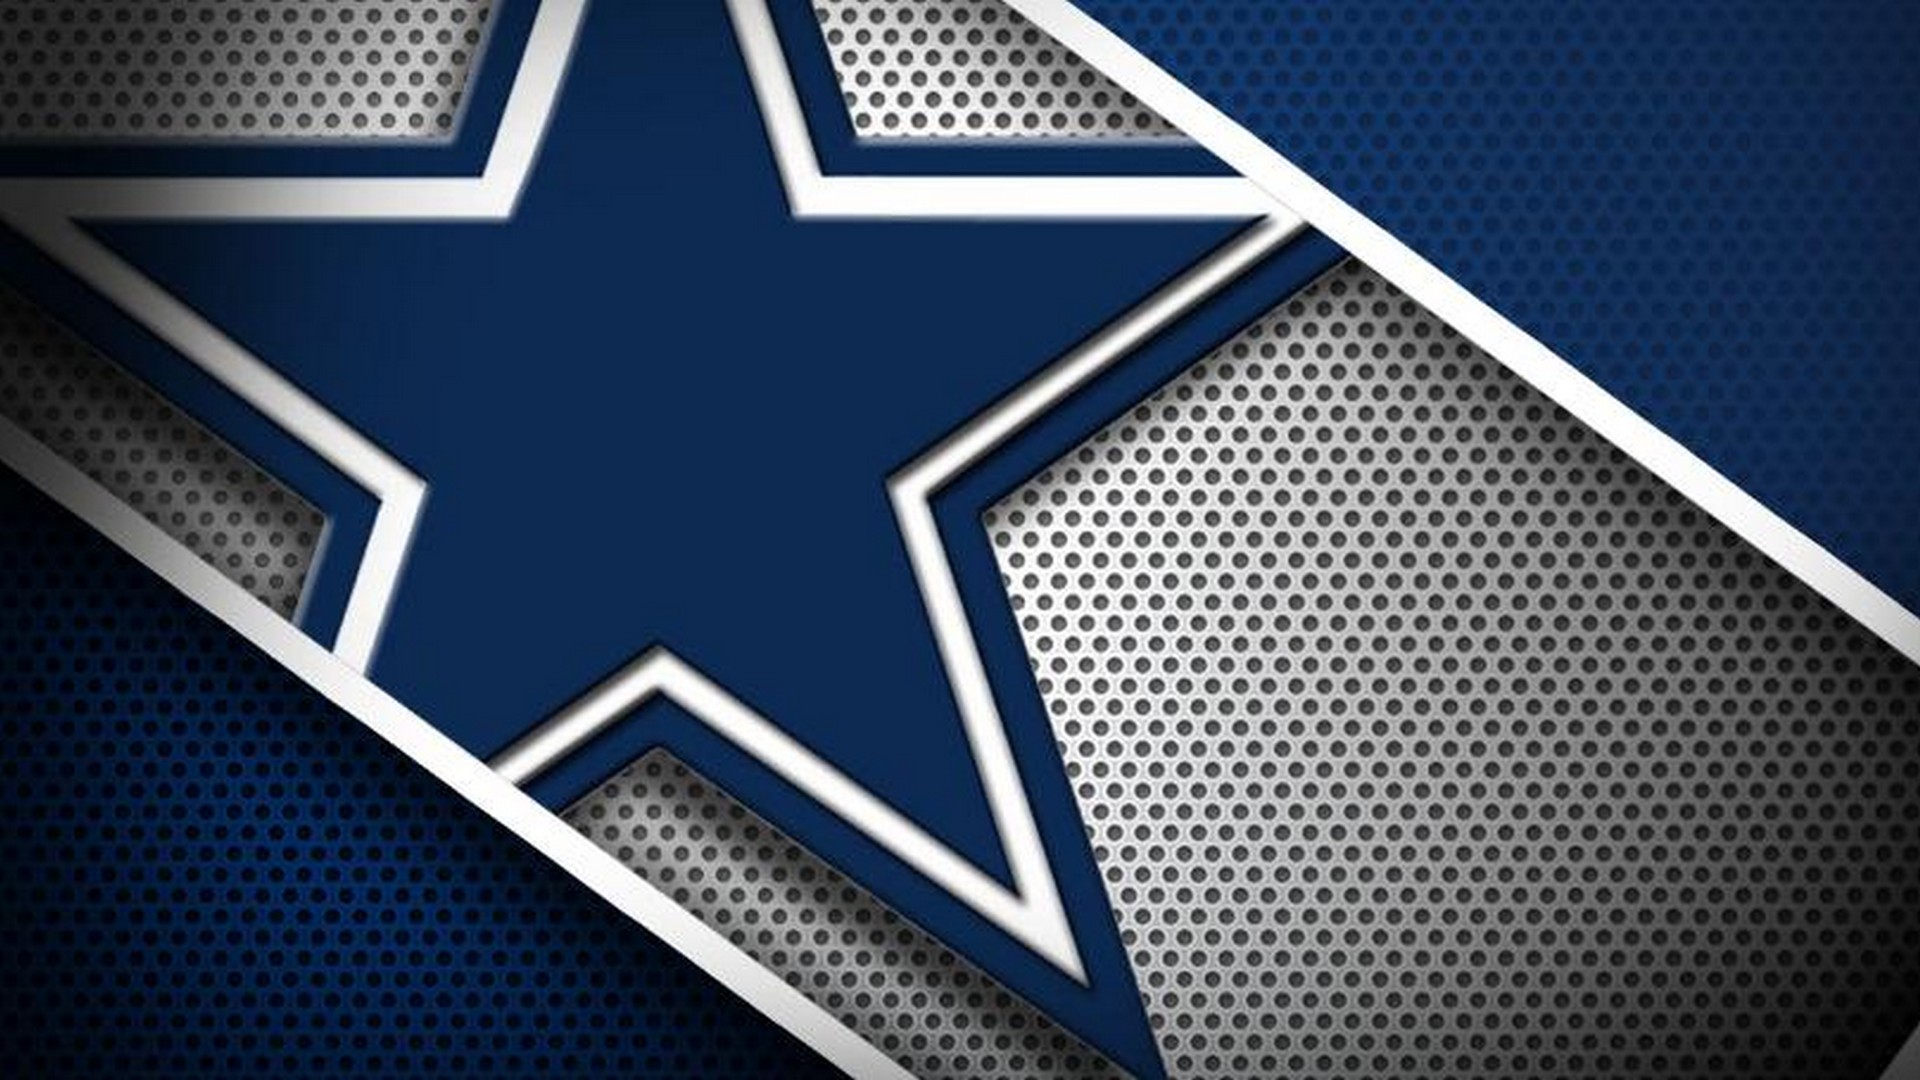 Dallas Cowboys NFL For Desktop Wallpaper With high-resolution 1920X1080 pixel. You can use this wallpaper for your Mac or Windows Desktop Background, iPhone, Android or Tablet and another Smartphone device